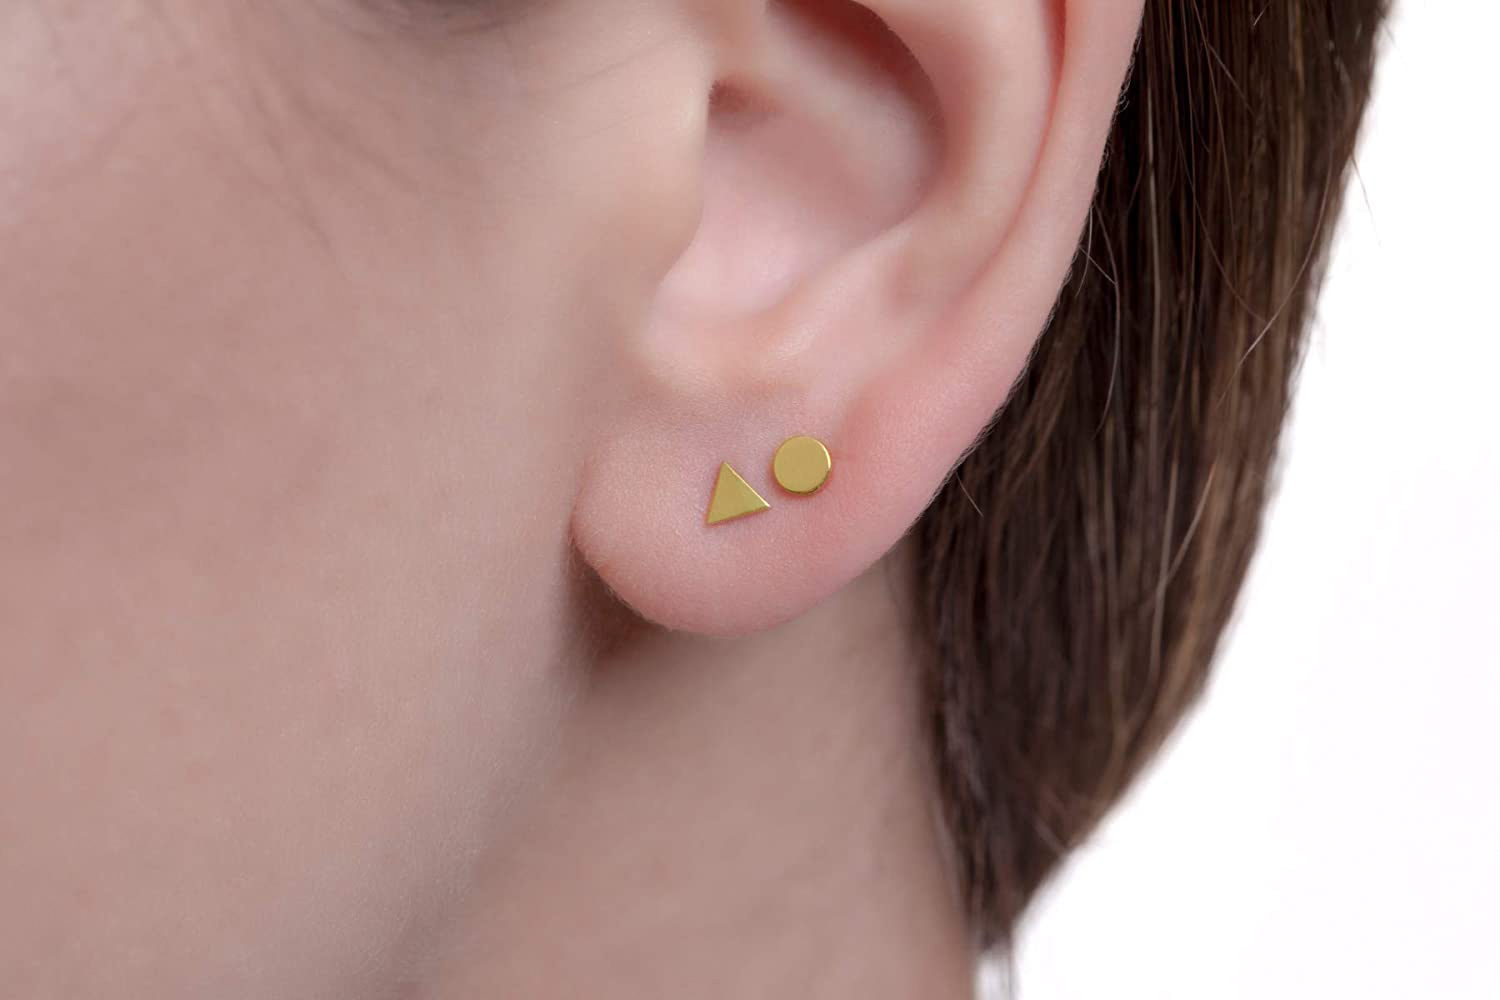 North Star stud earring with ear cuff and extra tiny earring – Online Shop  Loveisajewelry